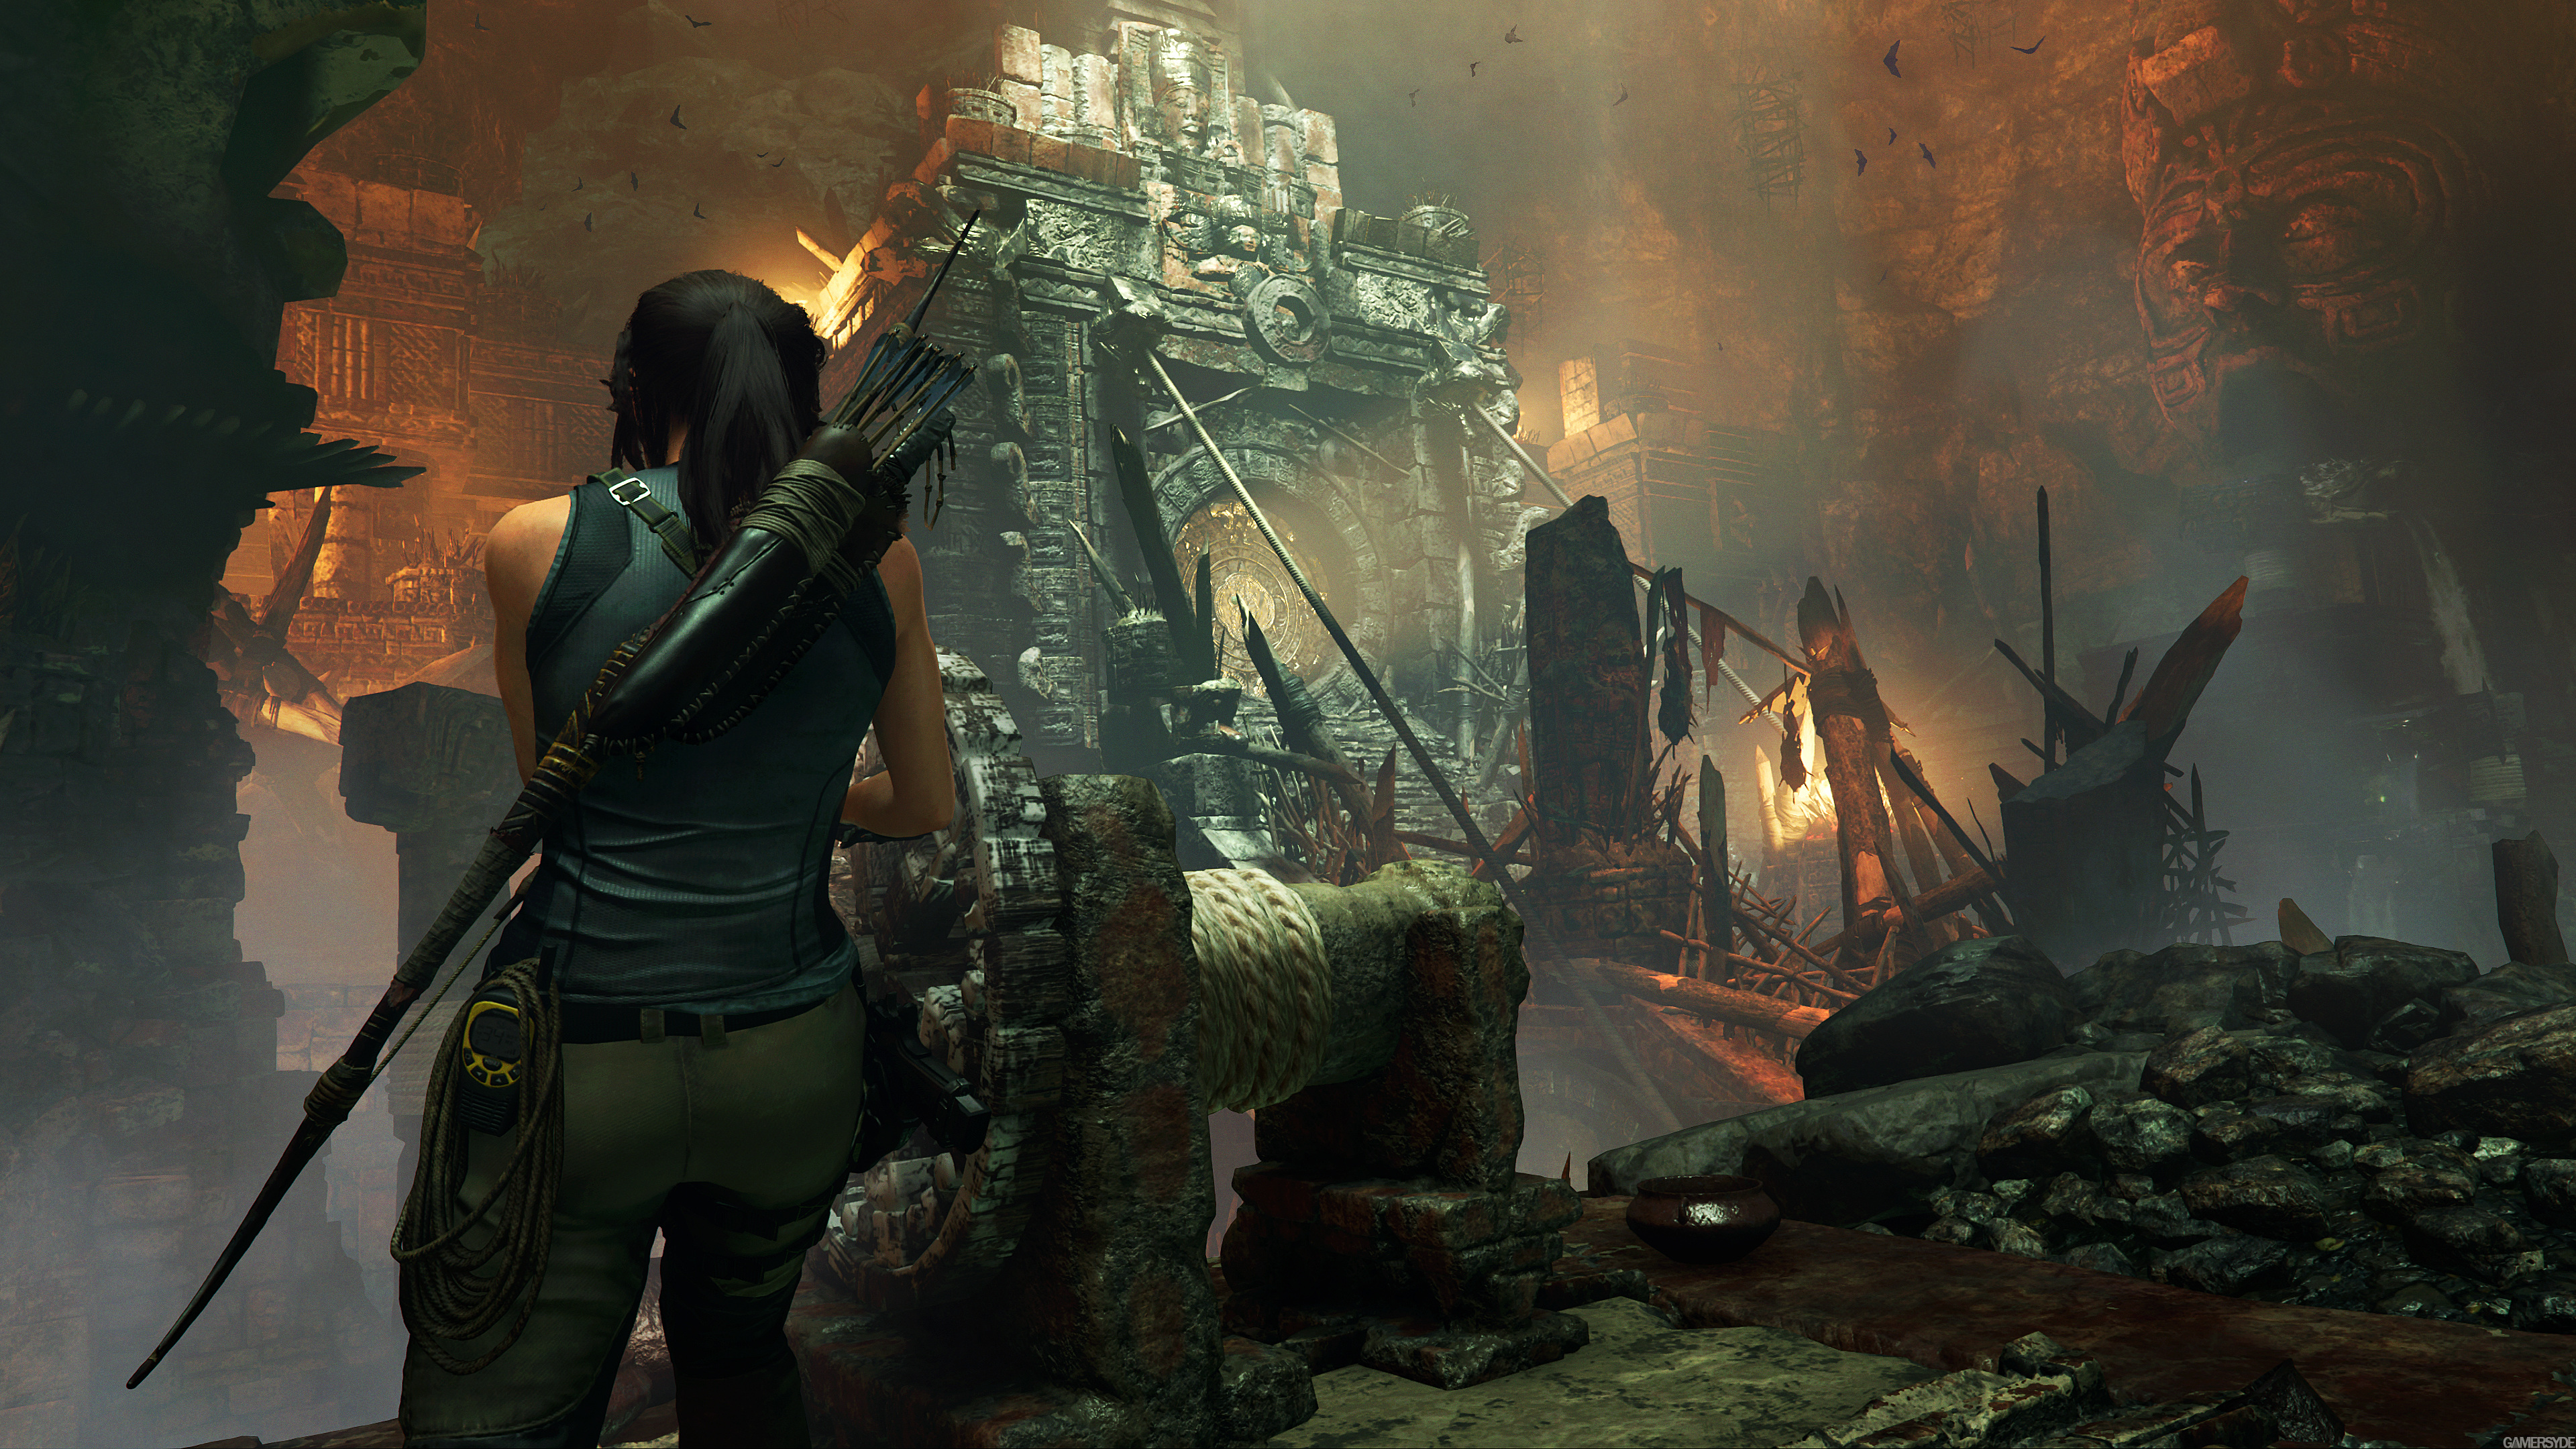 shadow of the tomb raider definitive edition pc key